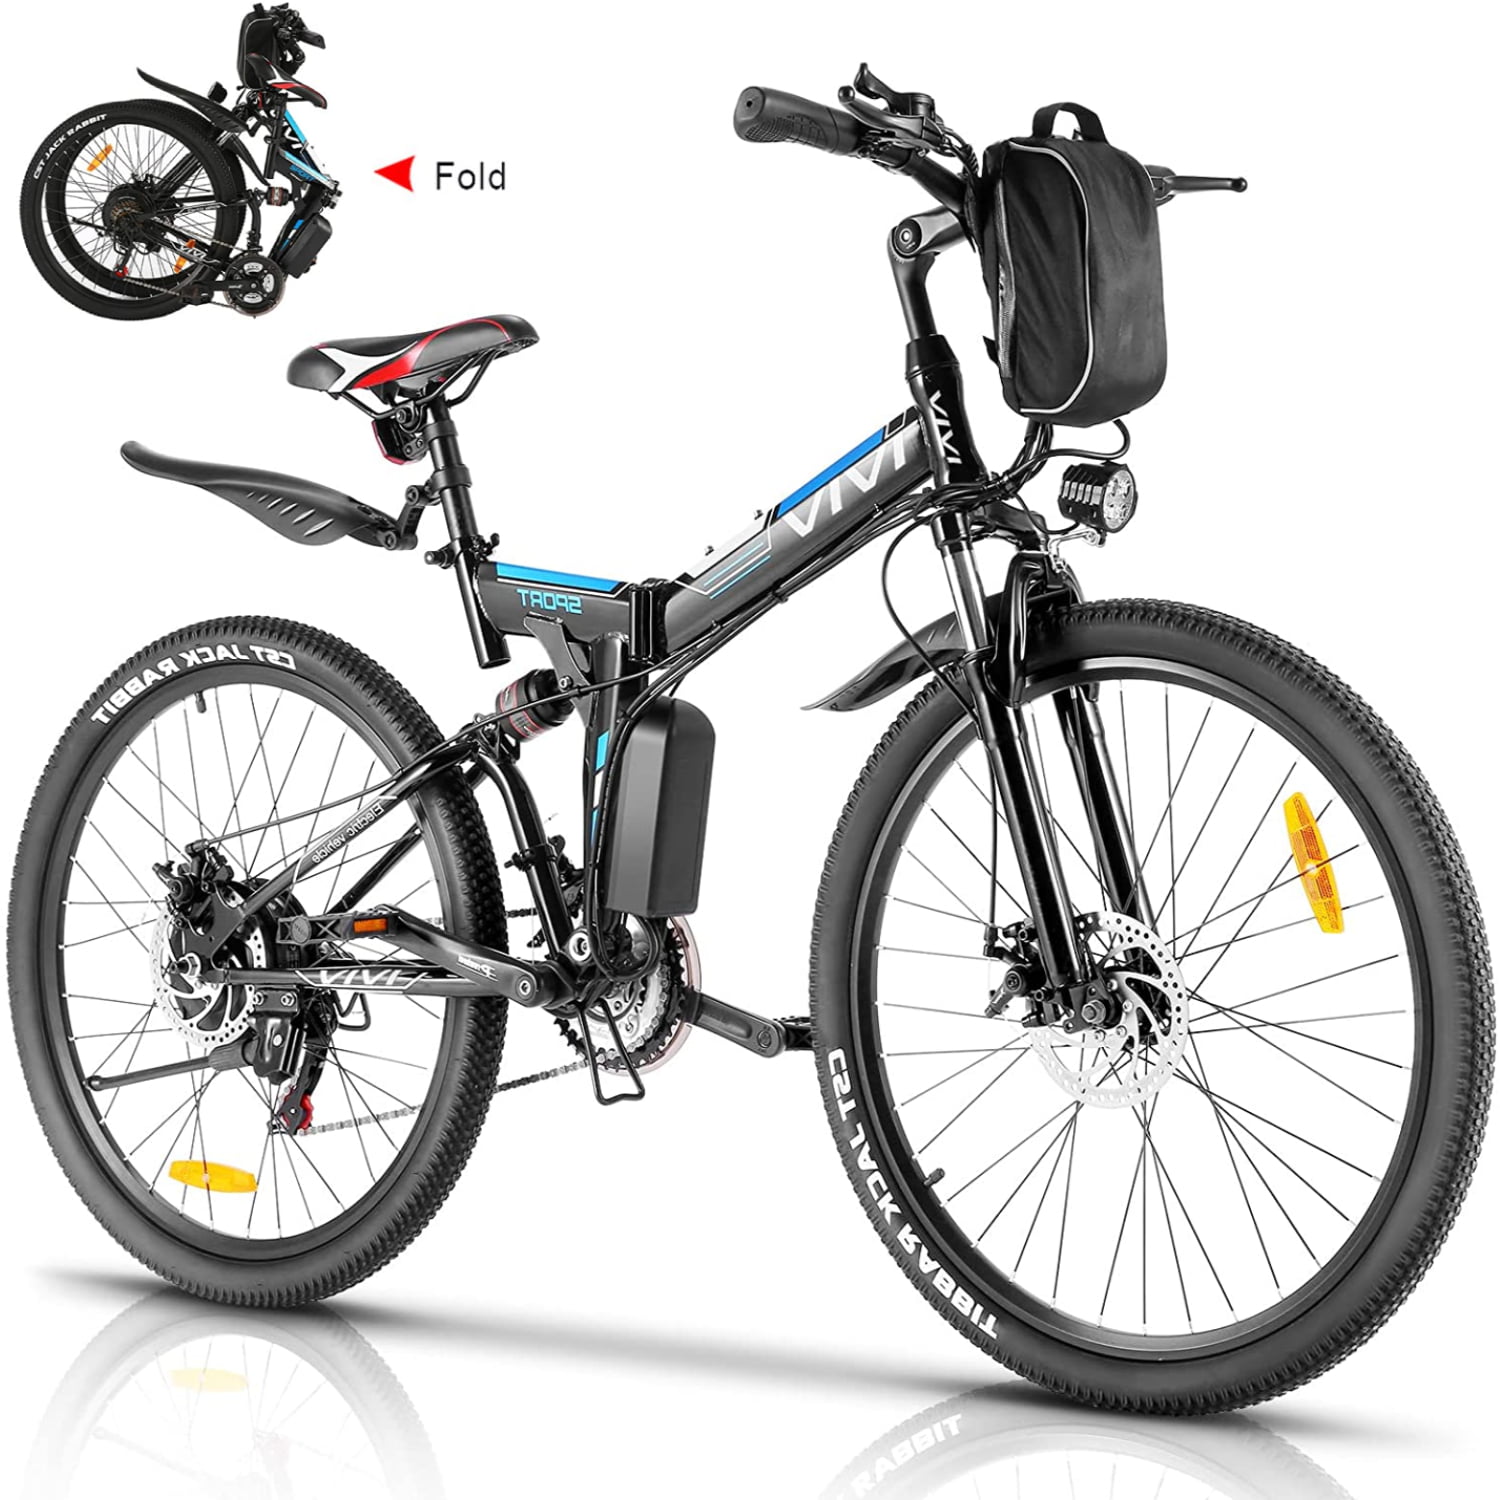 Details about   26/27.5" Electric Mountain Bike 350W Adult Commuter Bicycle Ebike 350W Motor_NEW 